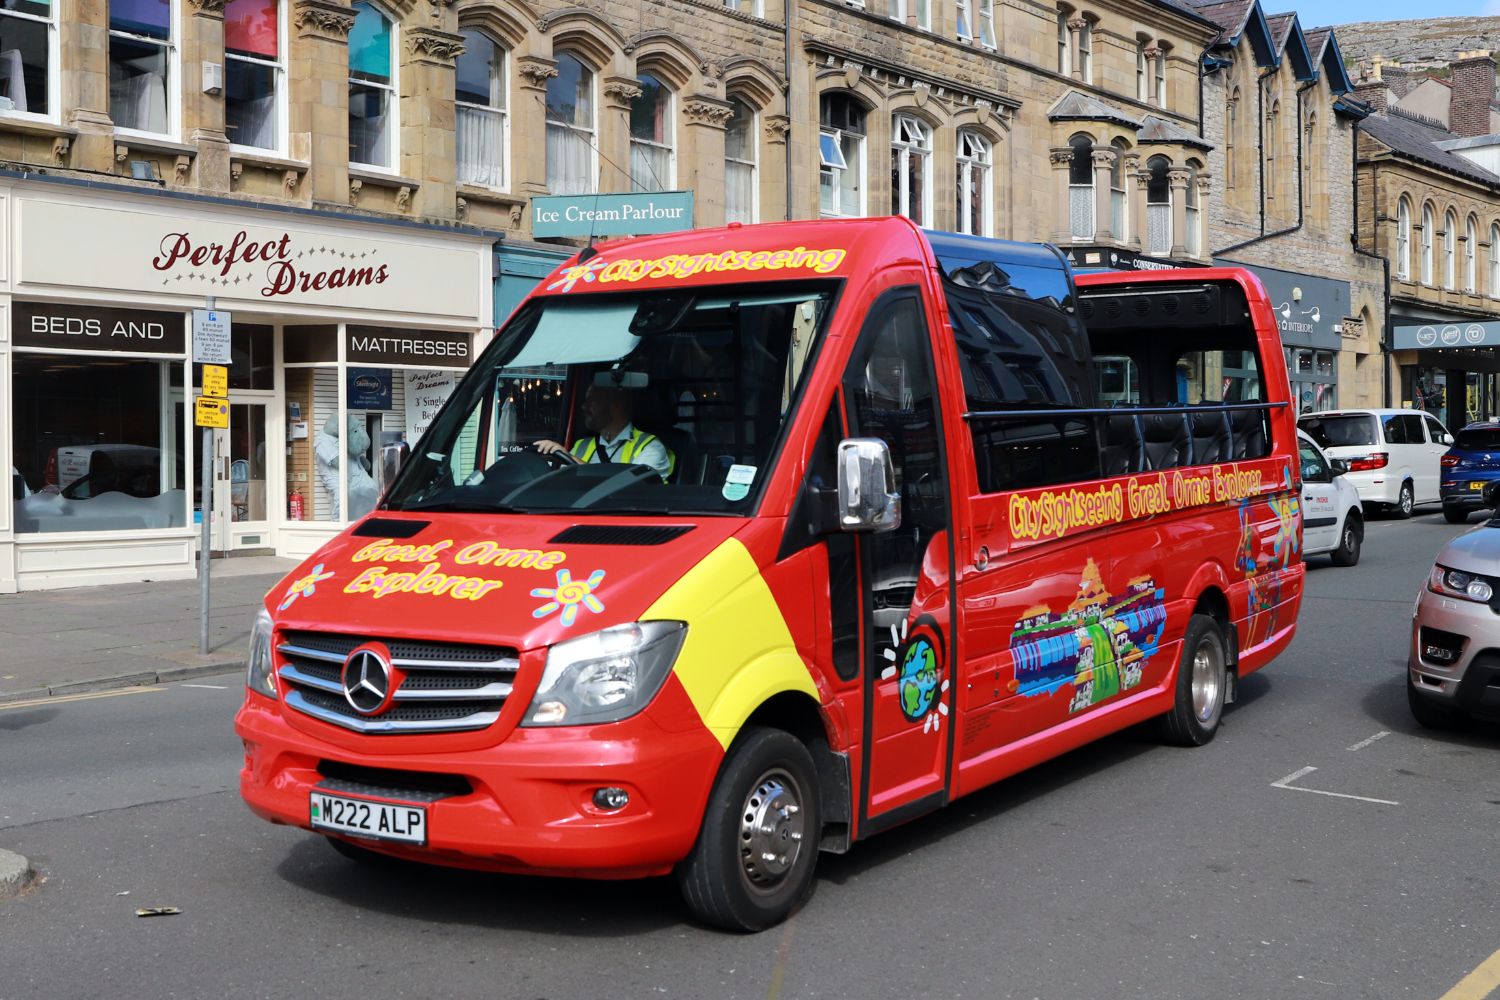 The two CarBus Cabriolet Mercedes-Benz Sprinters can be rapidly closed if the weather changes. This one is appropriately open on a sunny day in Llandudno town centre